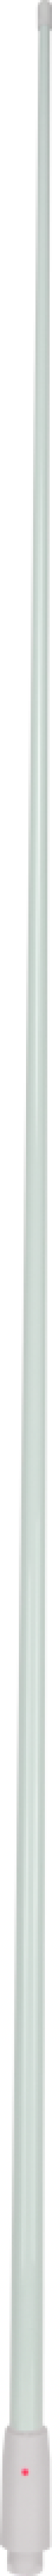 GME White 1800mm 27mhz Aerial  